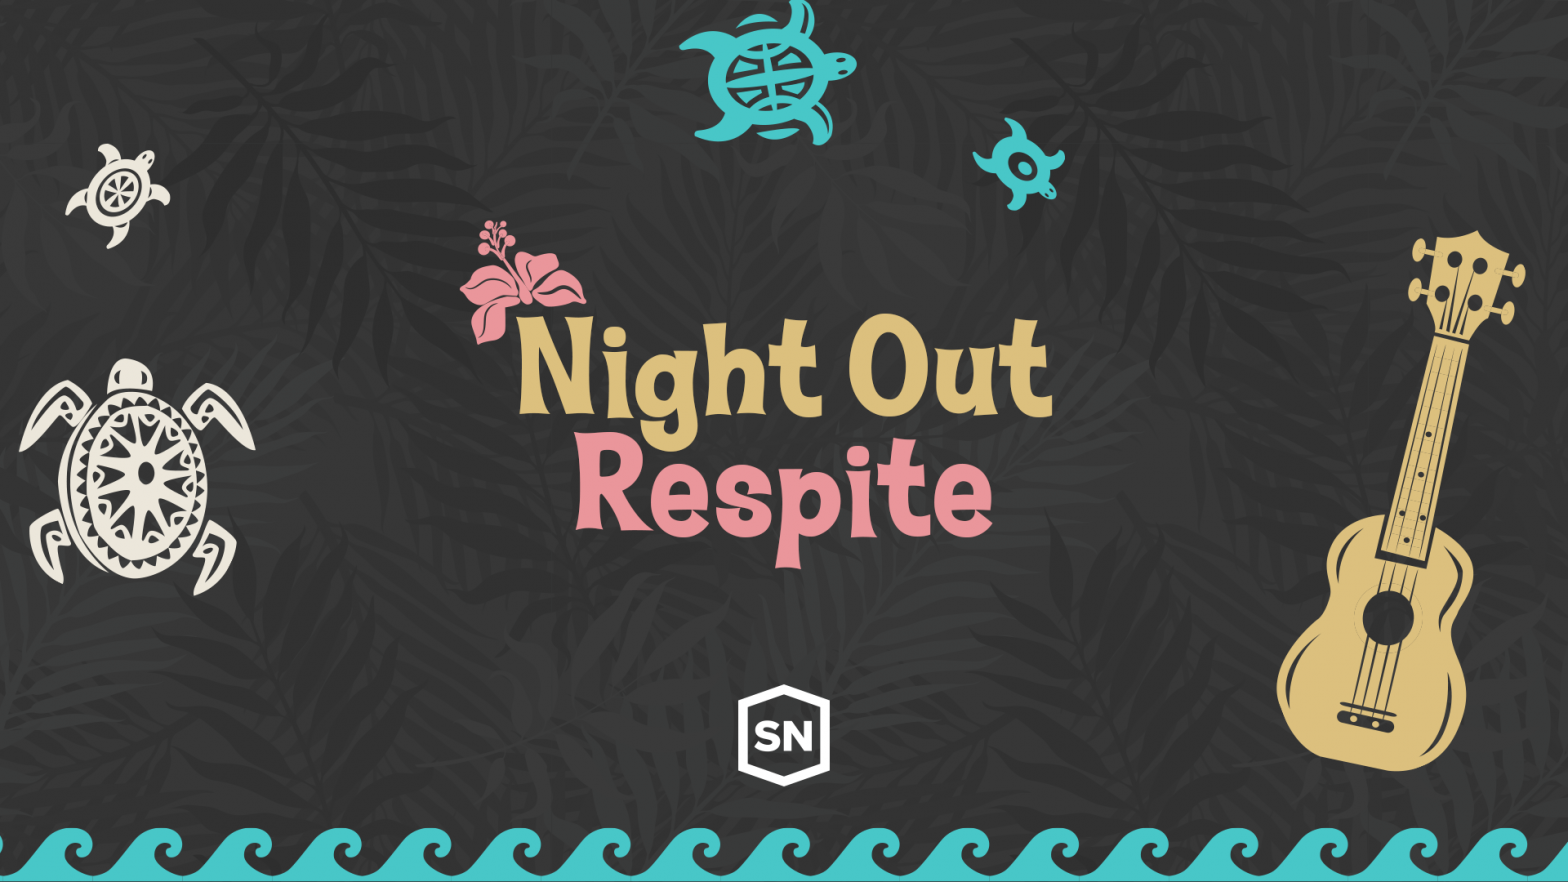 Night Out Respite event image